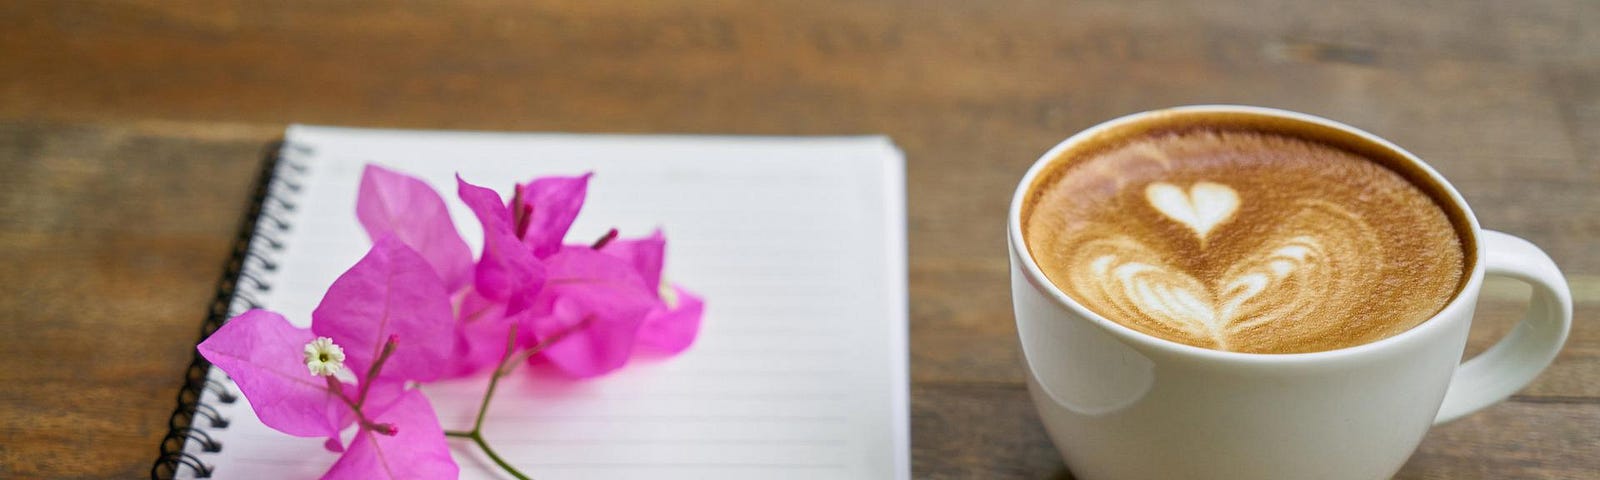 A lined notebook, pink flower and a cup of coffee